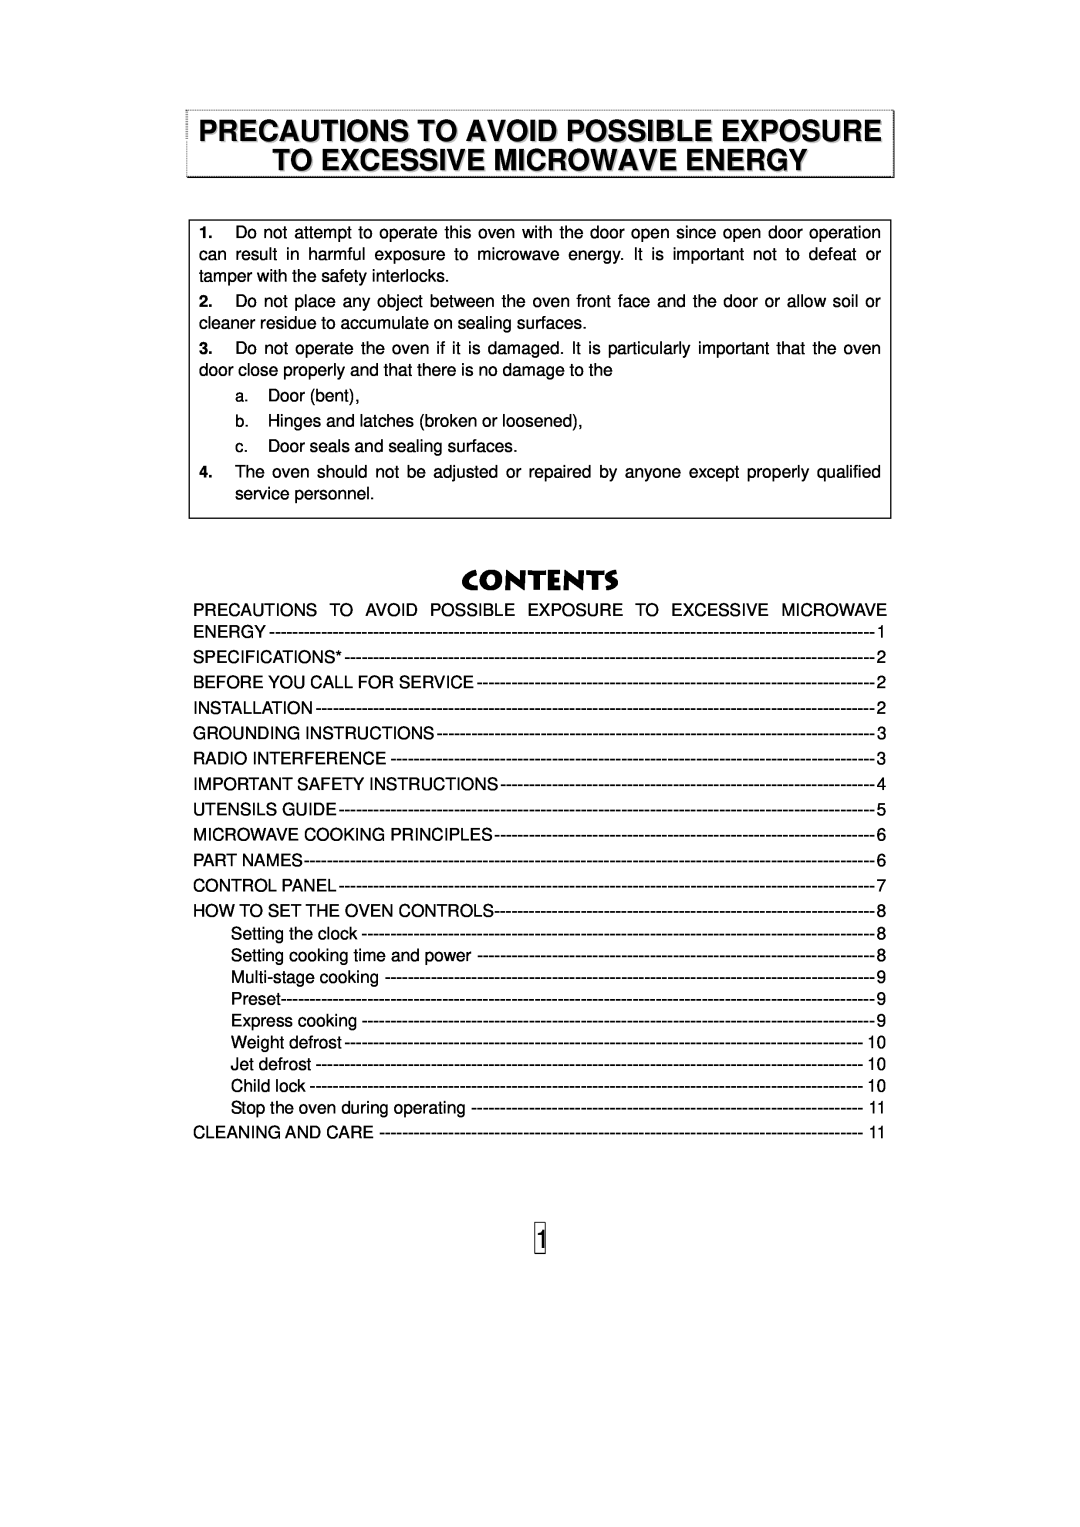 Haier HGN-36100EB owner manual Precautions To Avoid Possible Exposure, To Excessive Microwave Energy, Contents 